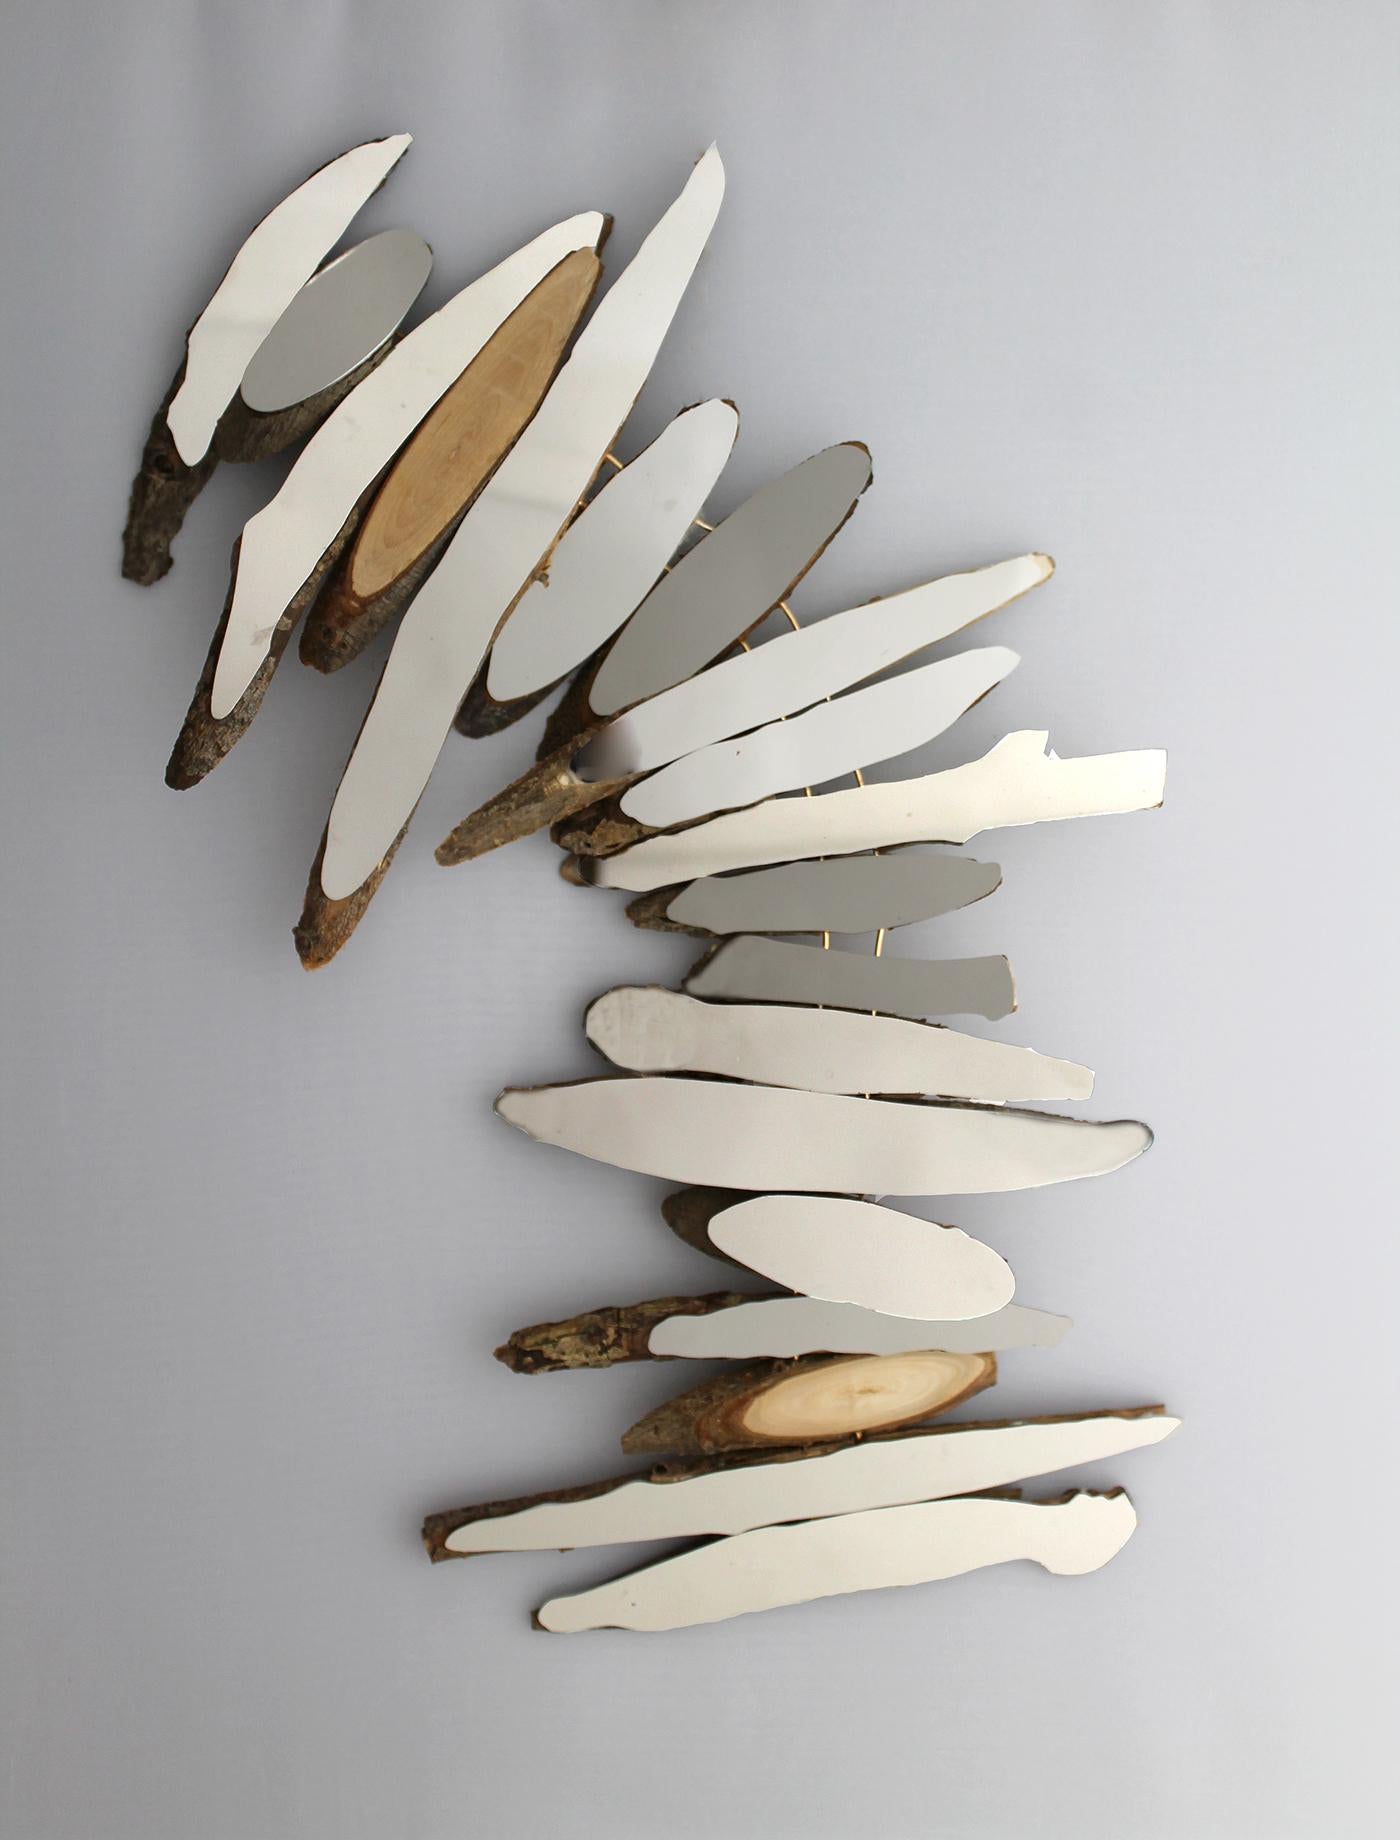 Lee Borthwick Abstract Sculpture - Willow Feathers: A Sculptural Wall Hanging of Mirrors and Fallen Wood